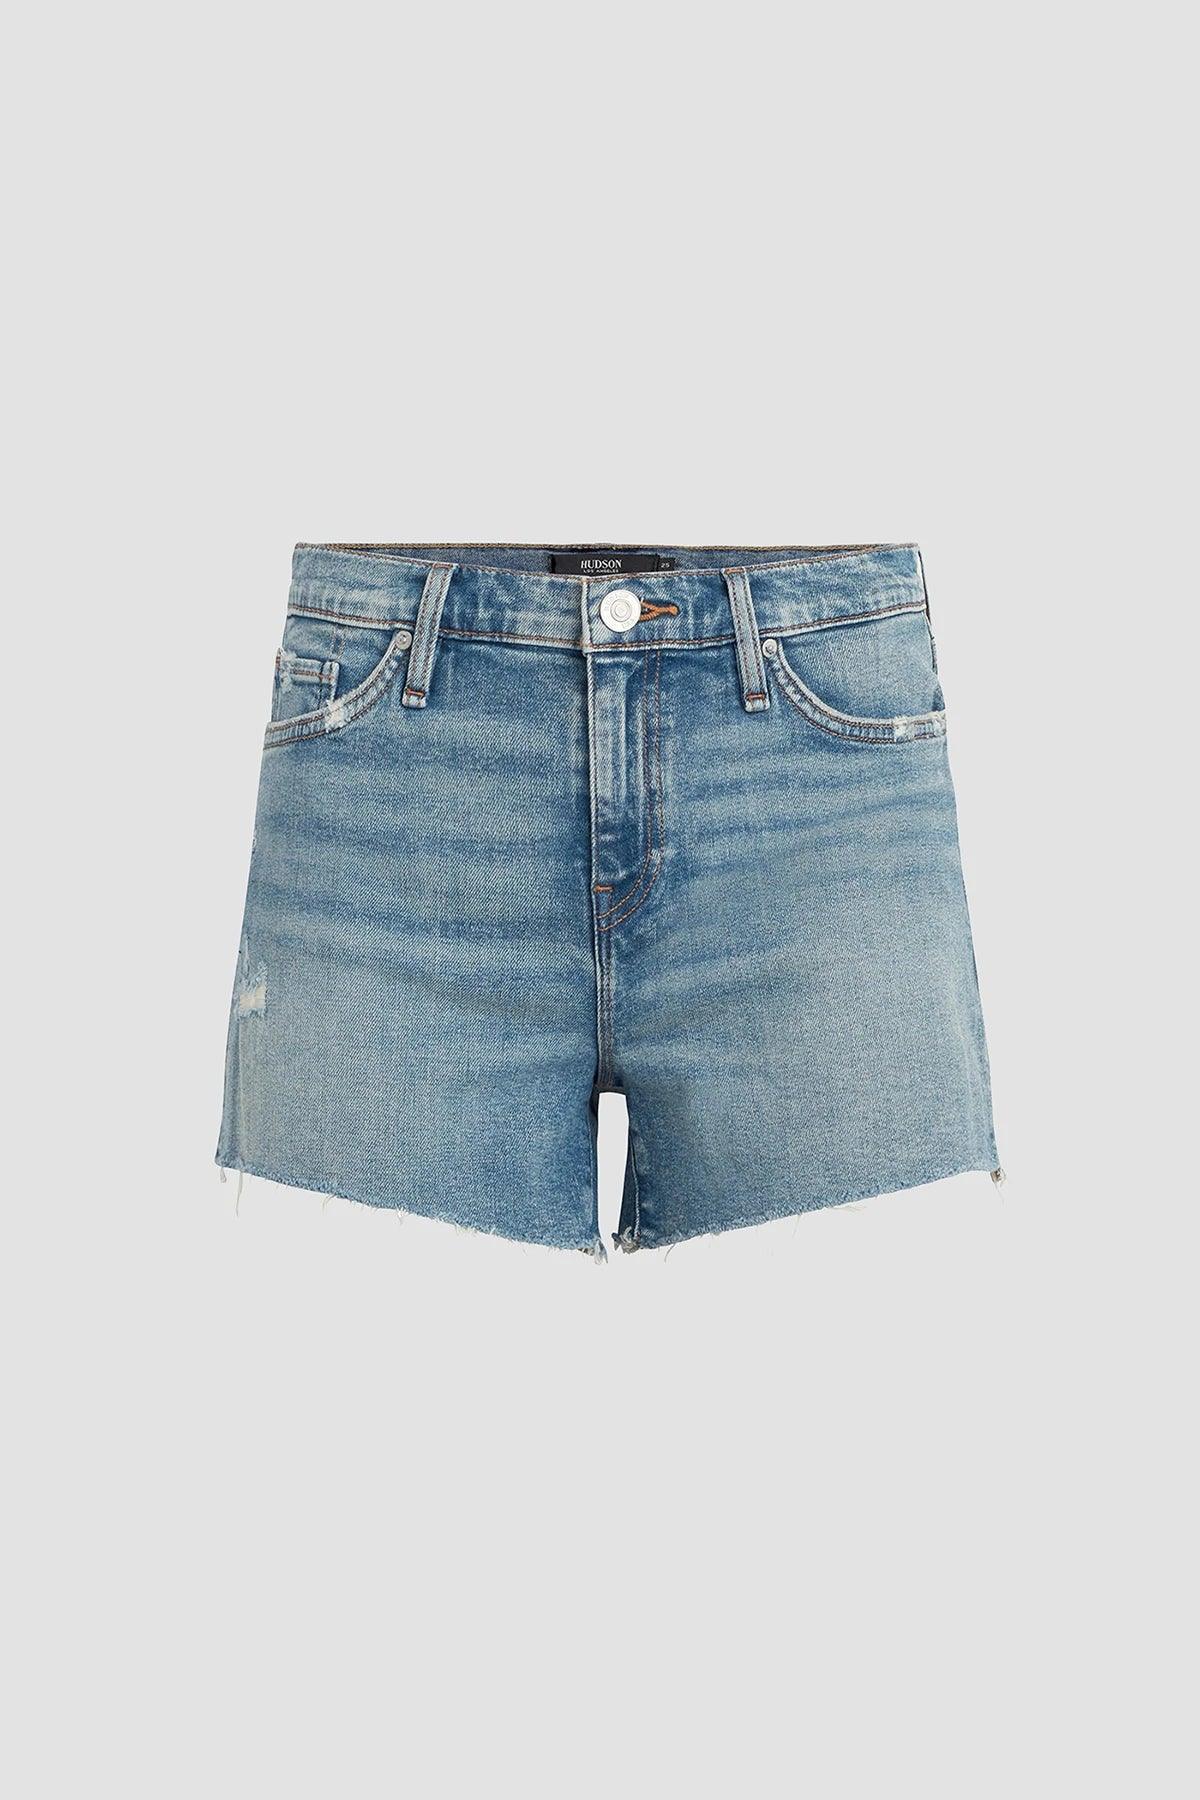 Gemma Mid Rise Jean Shorts by Hudson (Various Colors) - Haven